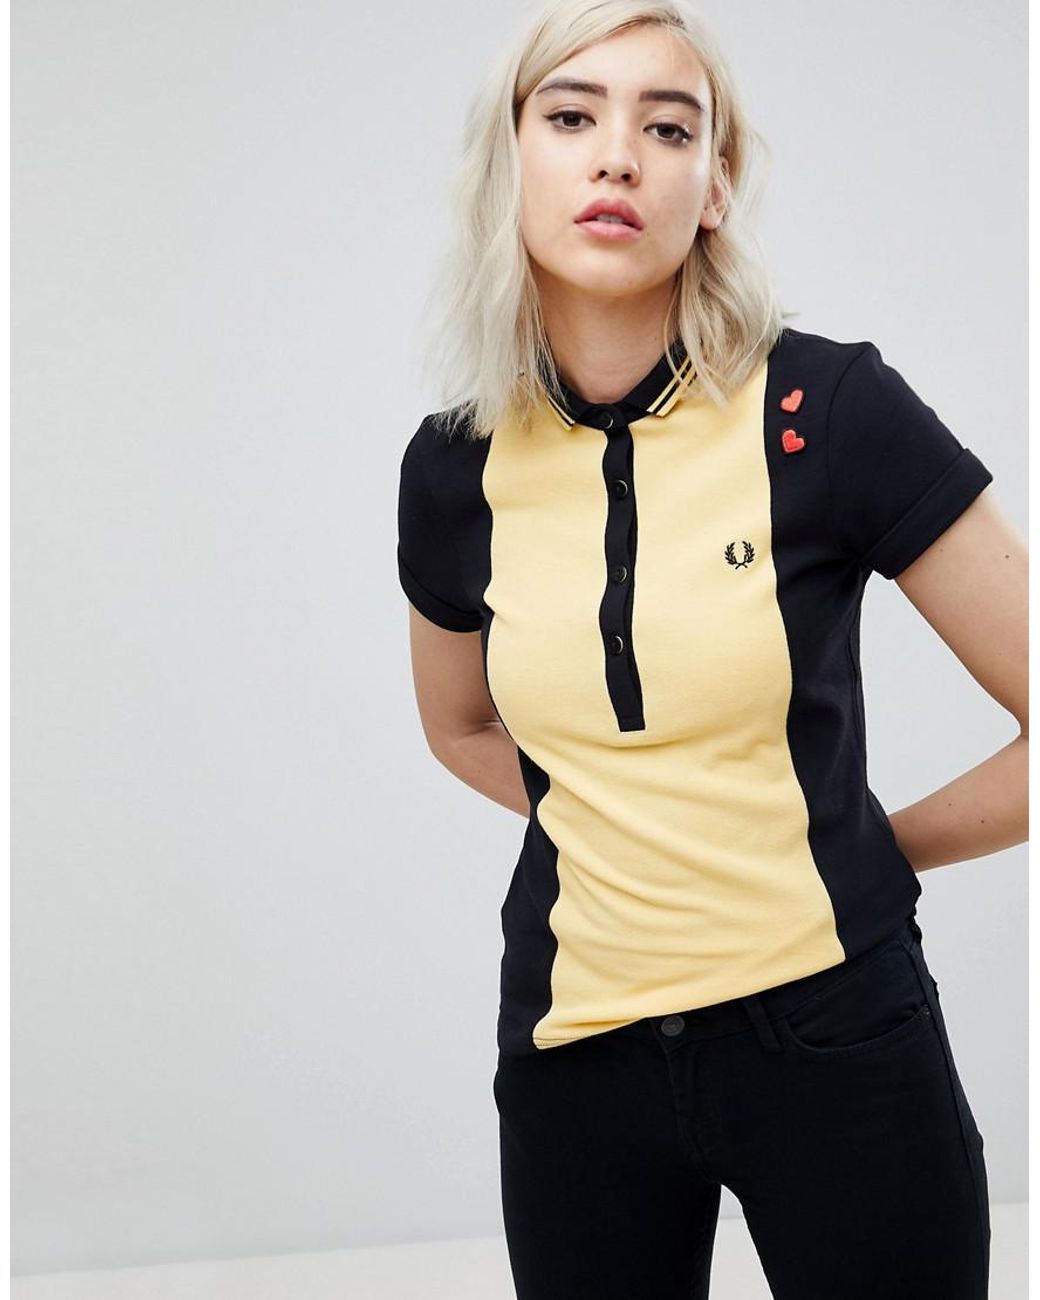 Fred Perry Amy Winehouse Foundation Colour Block Pique Polo Shirt in Black  | Lyst UK